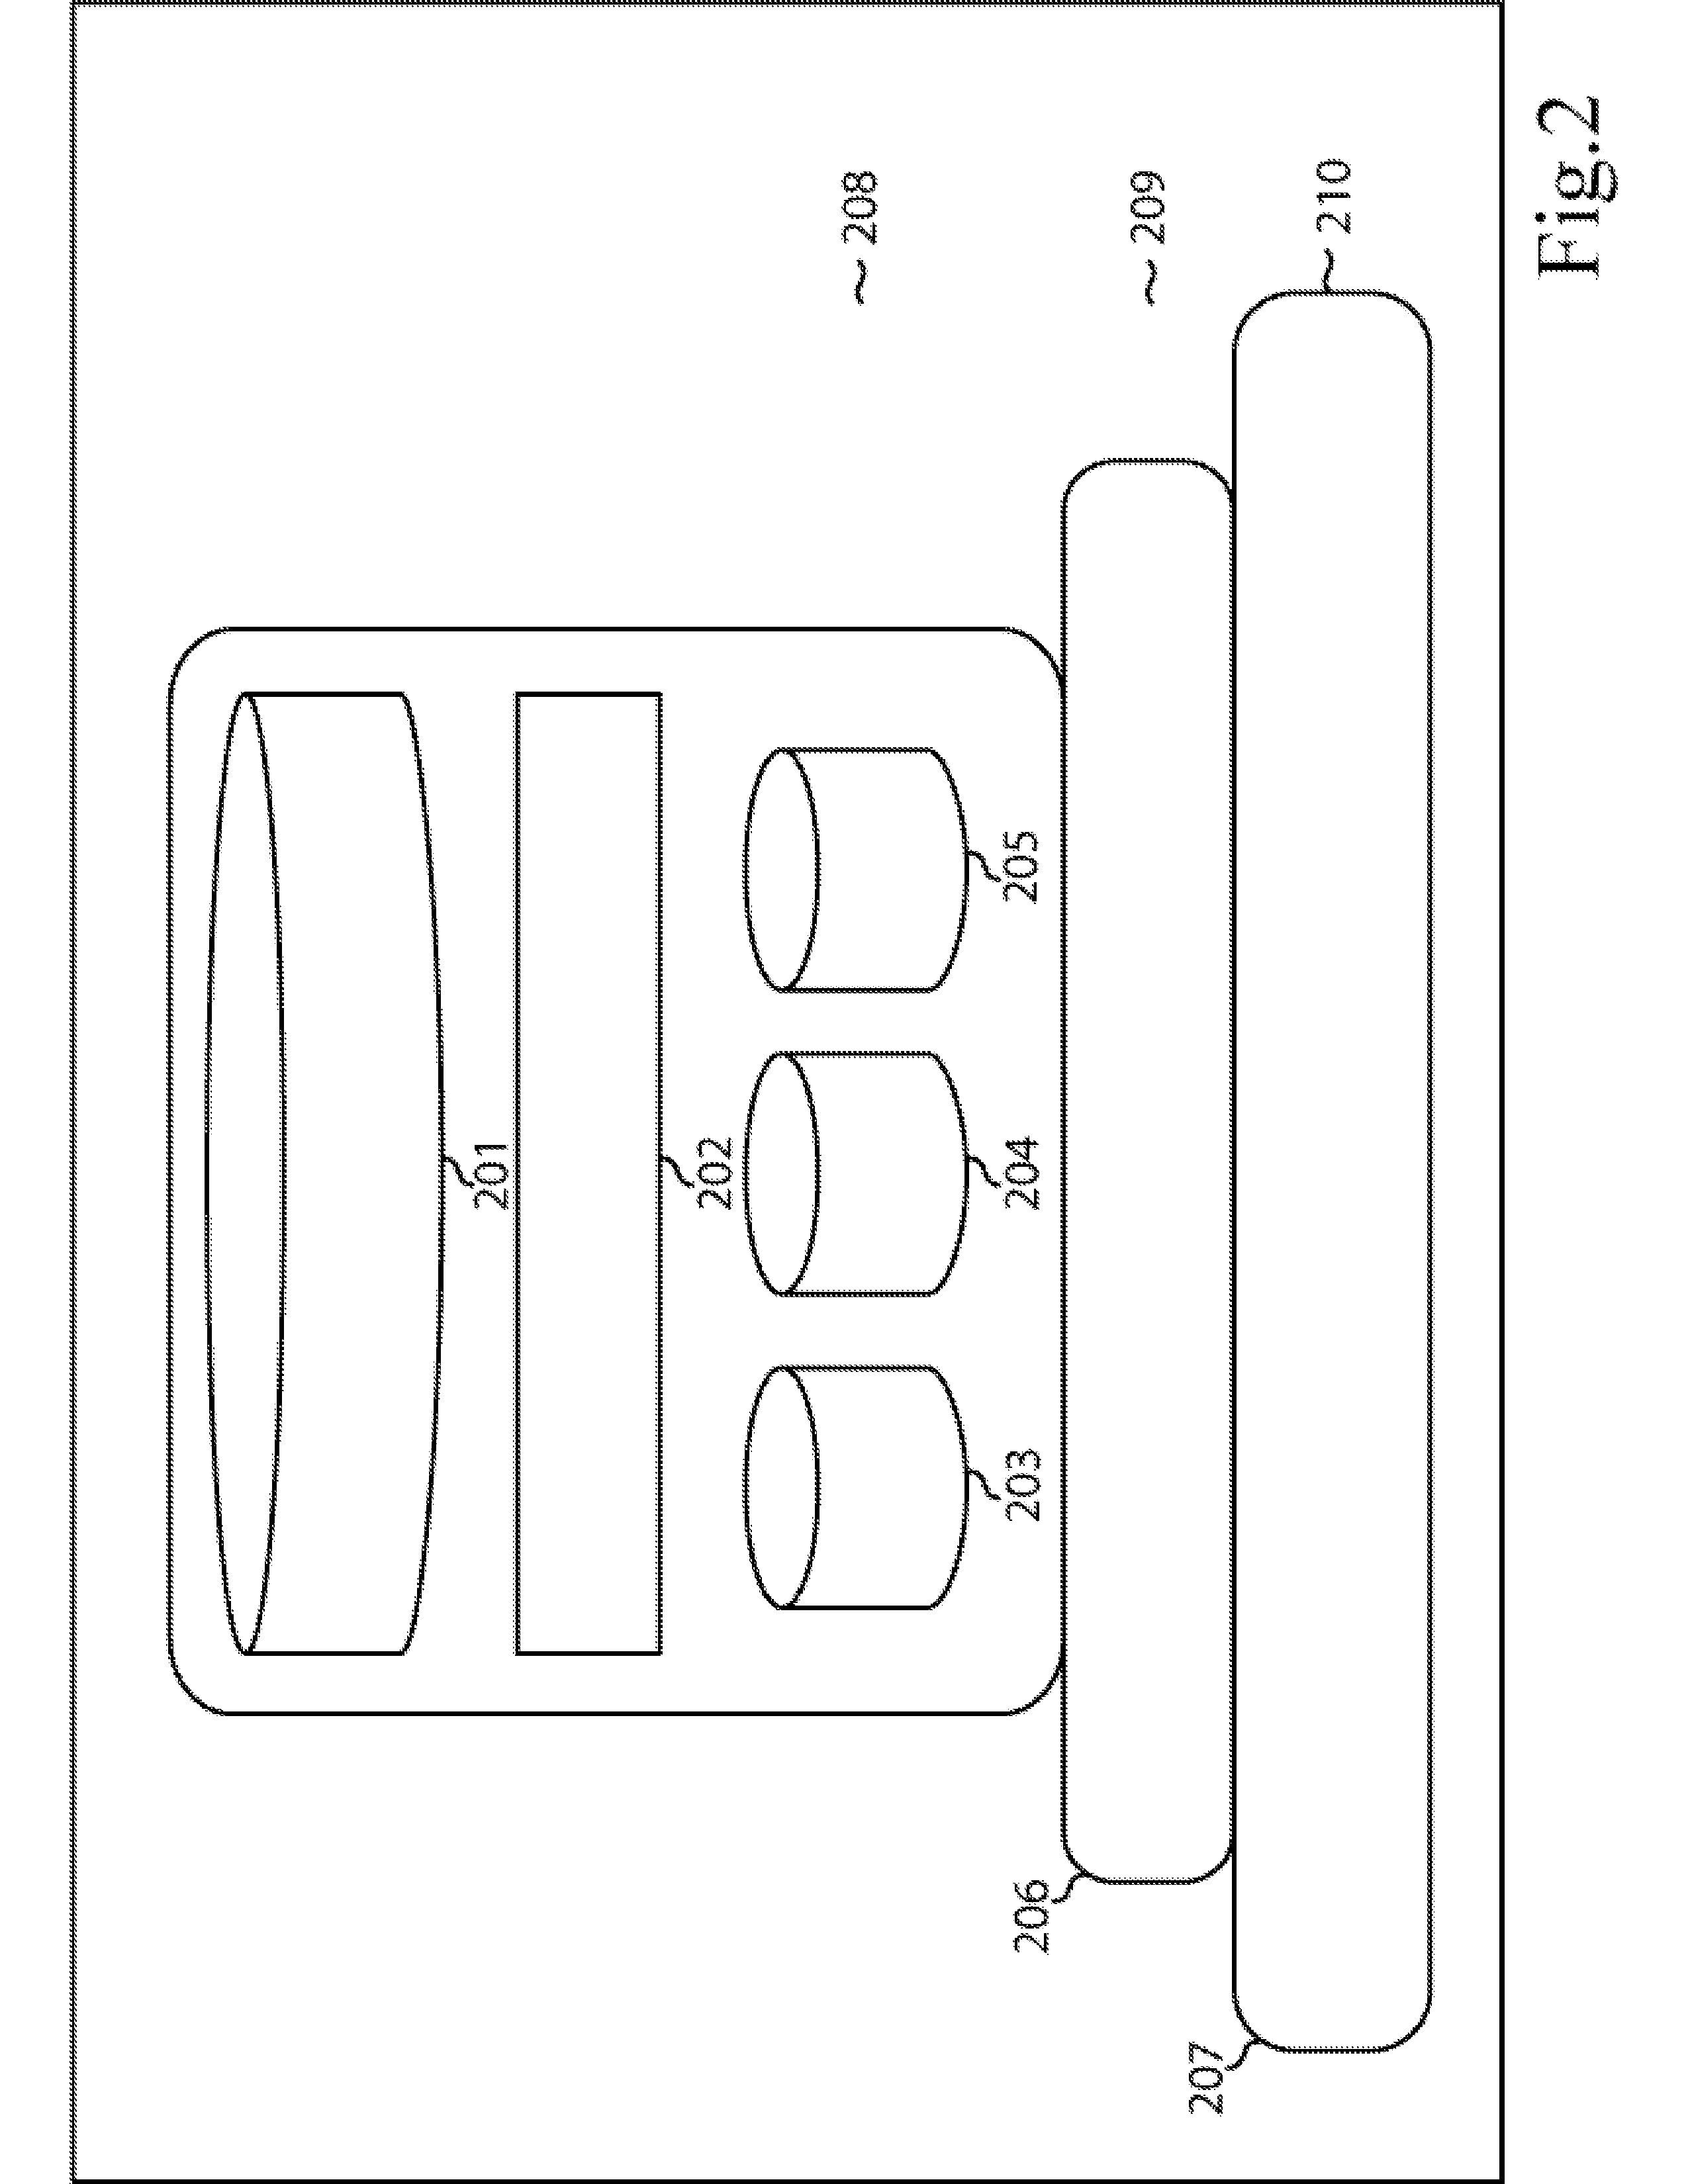 System and method for driver reaction impairment vehicle exclusion via systematic measurement for assurance of reaction time